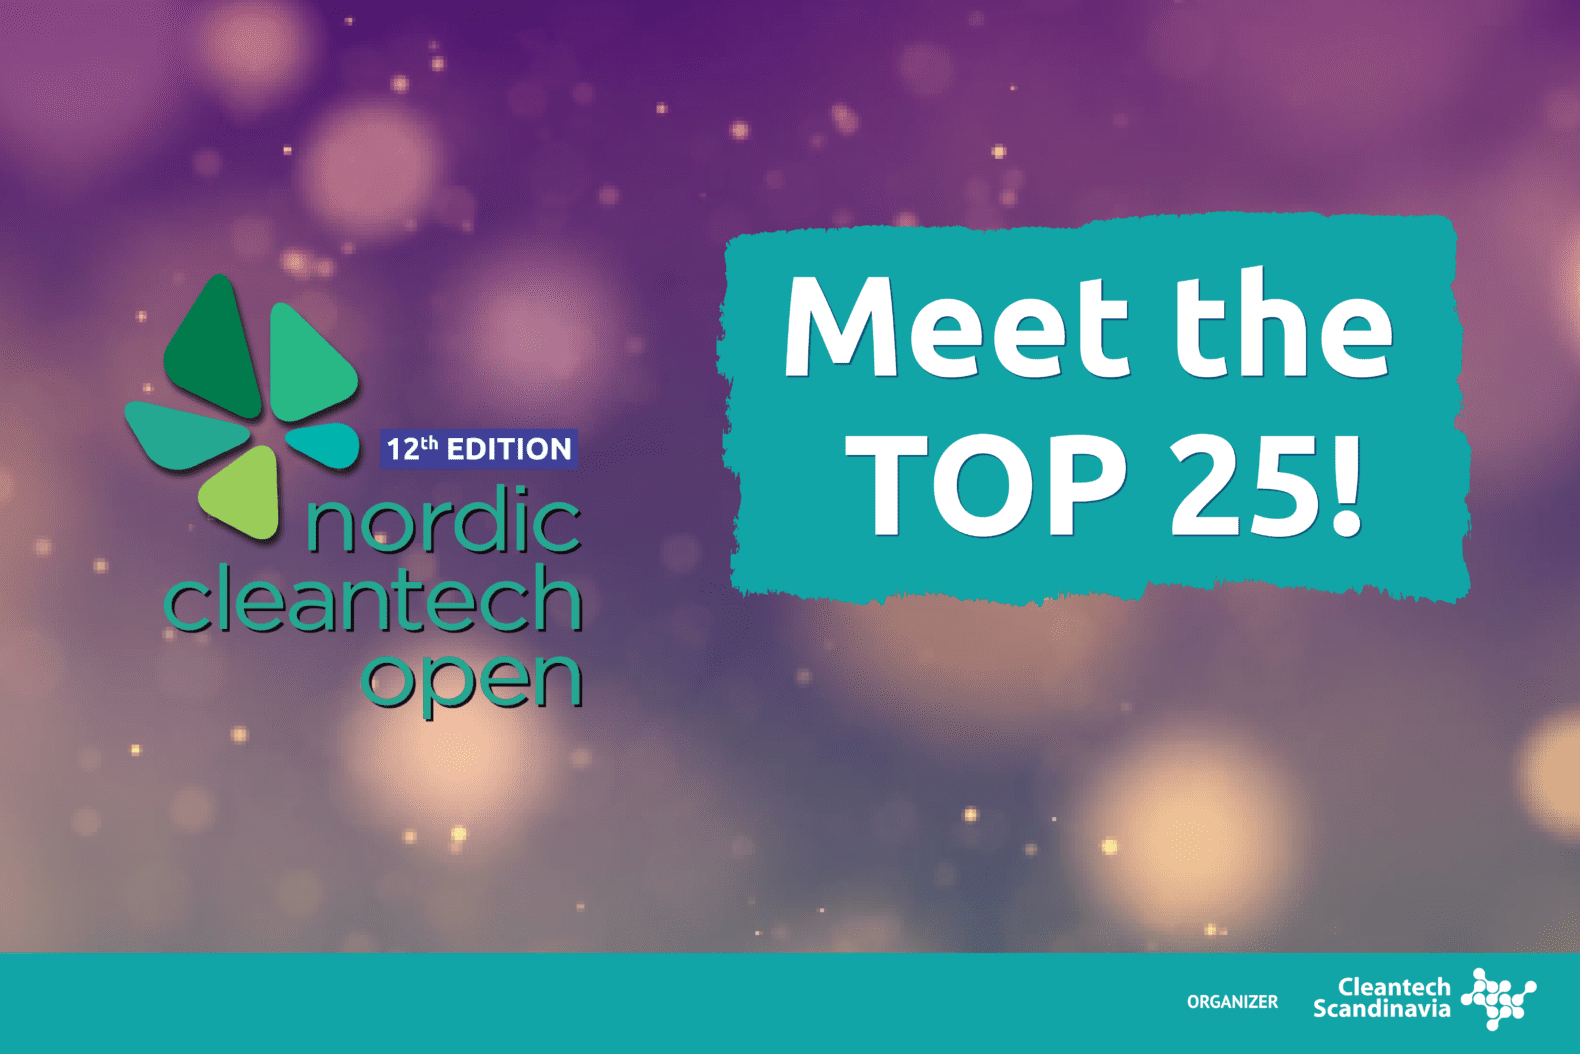 Meet the TOP 25 selected companies of the 12th Nordic Cleantech Open